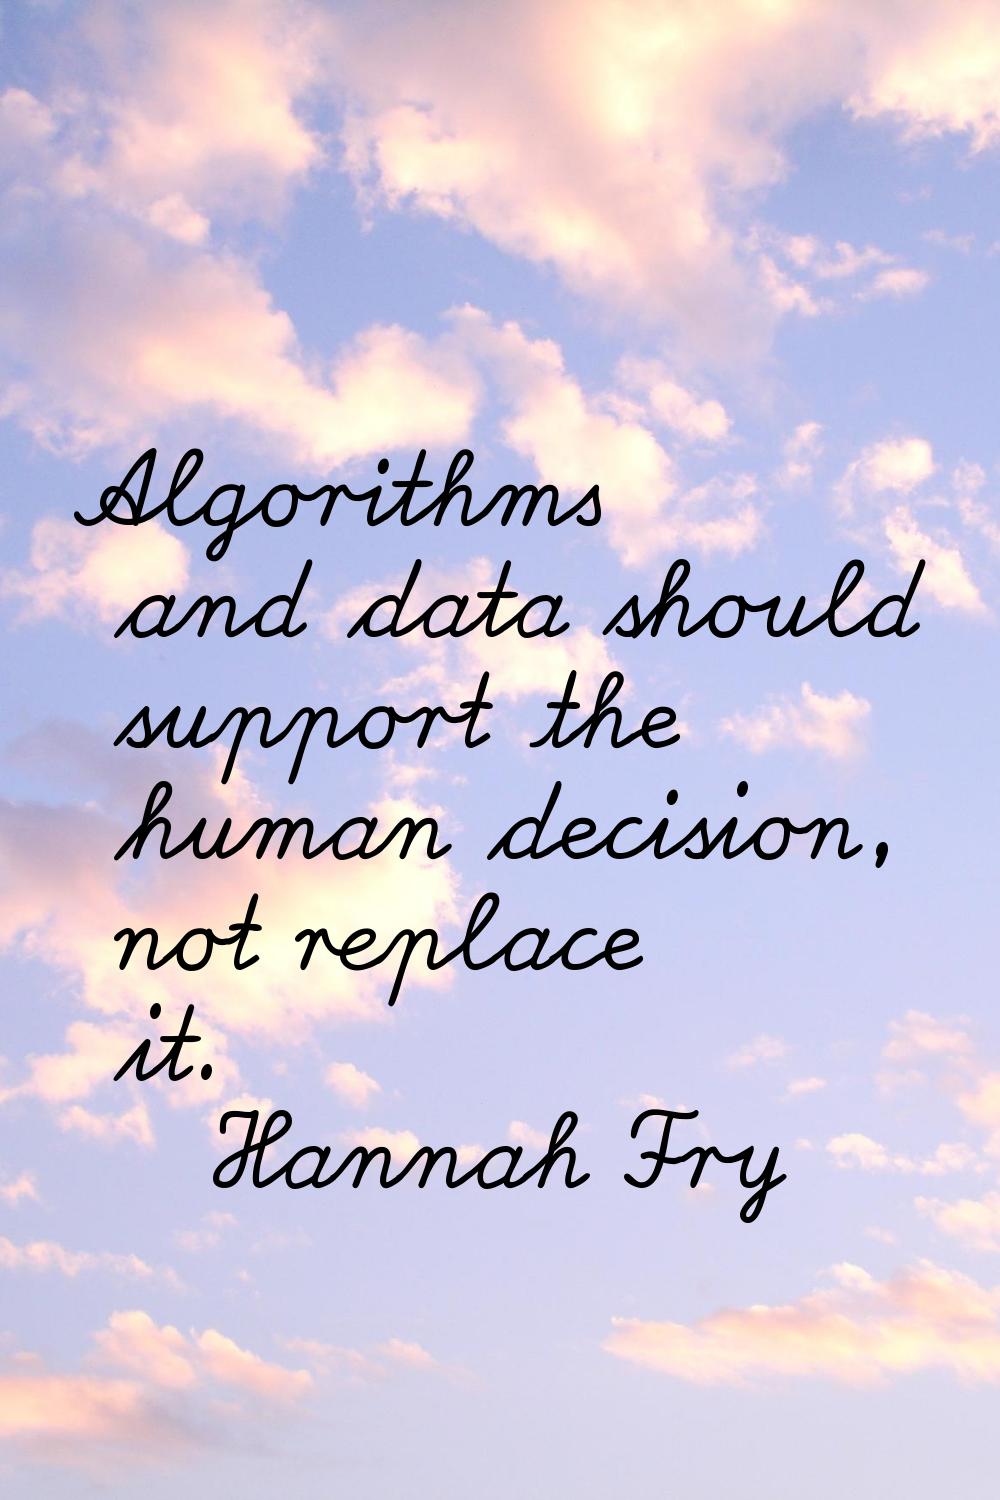 Algorithms and data should support the human decision, not replace it.